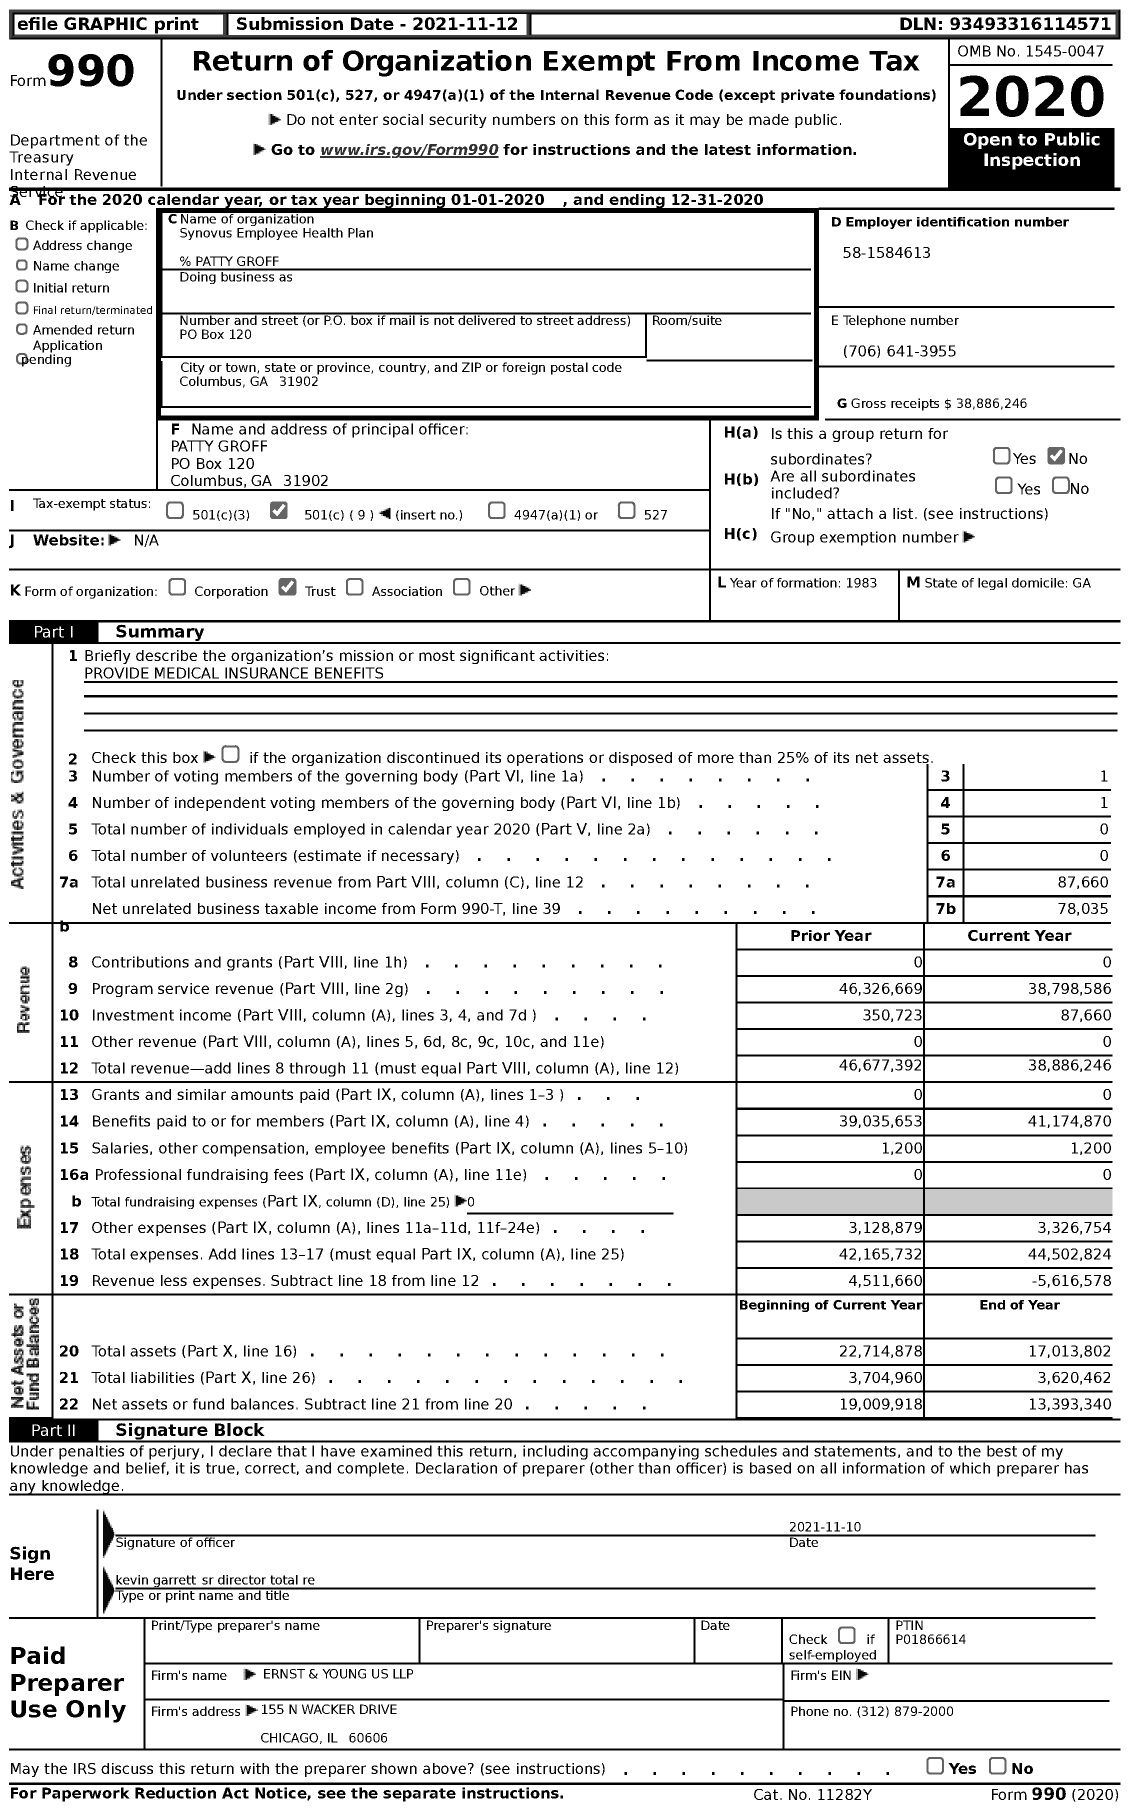 Image of first page of 2020 Form 990 for Synovus Employee Health Plan